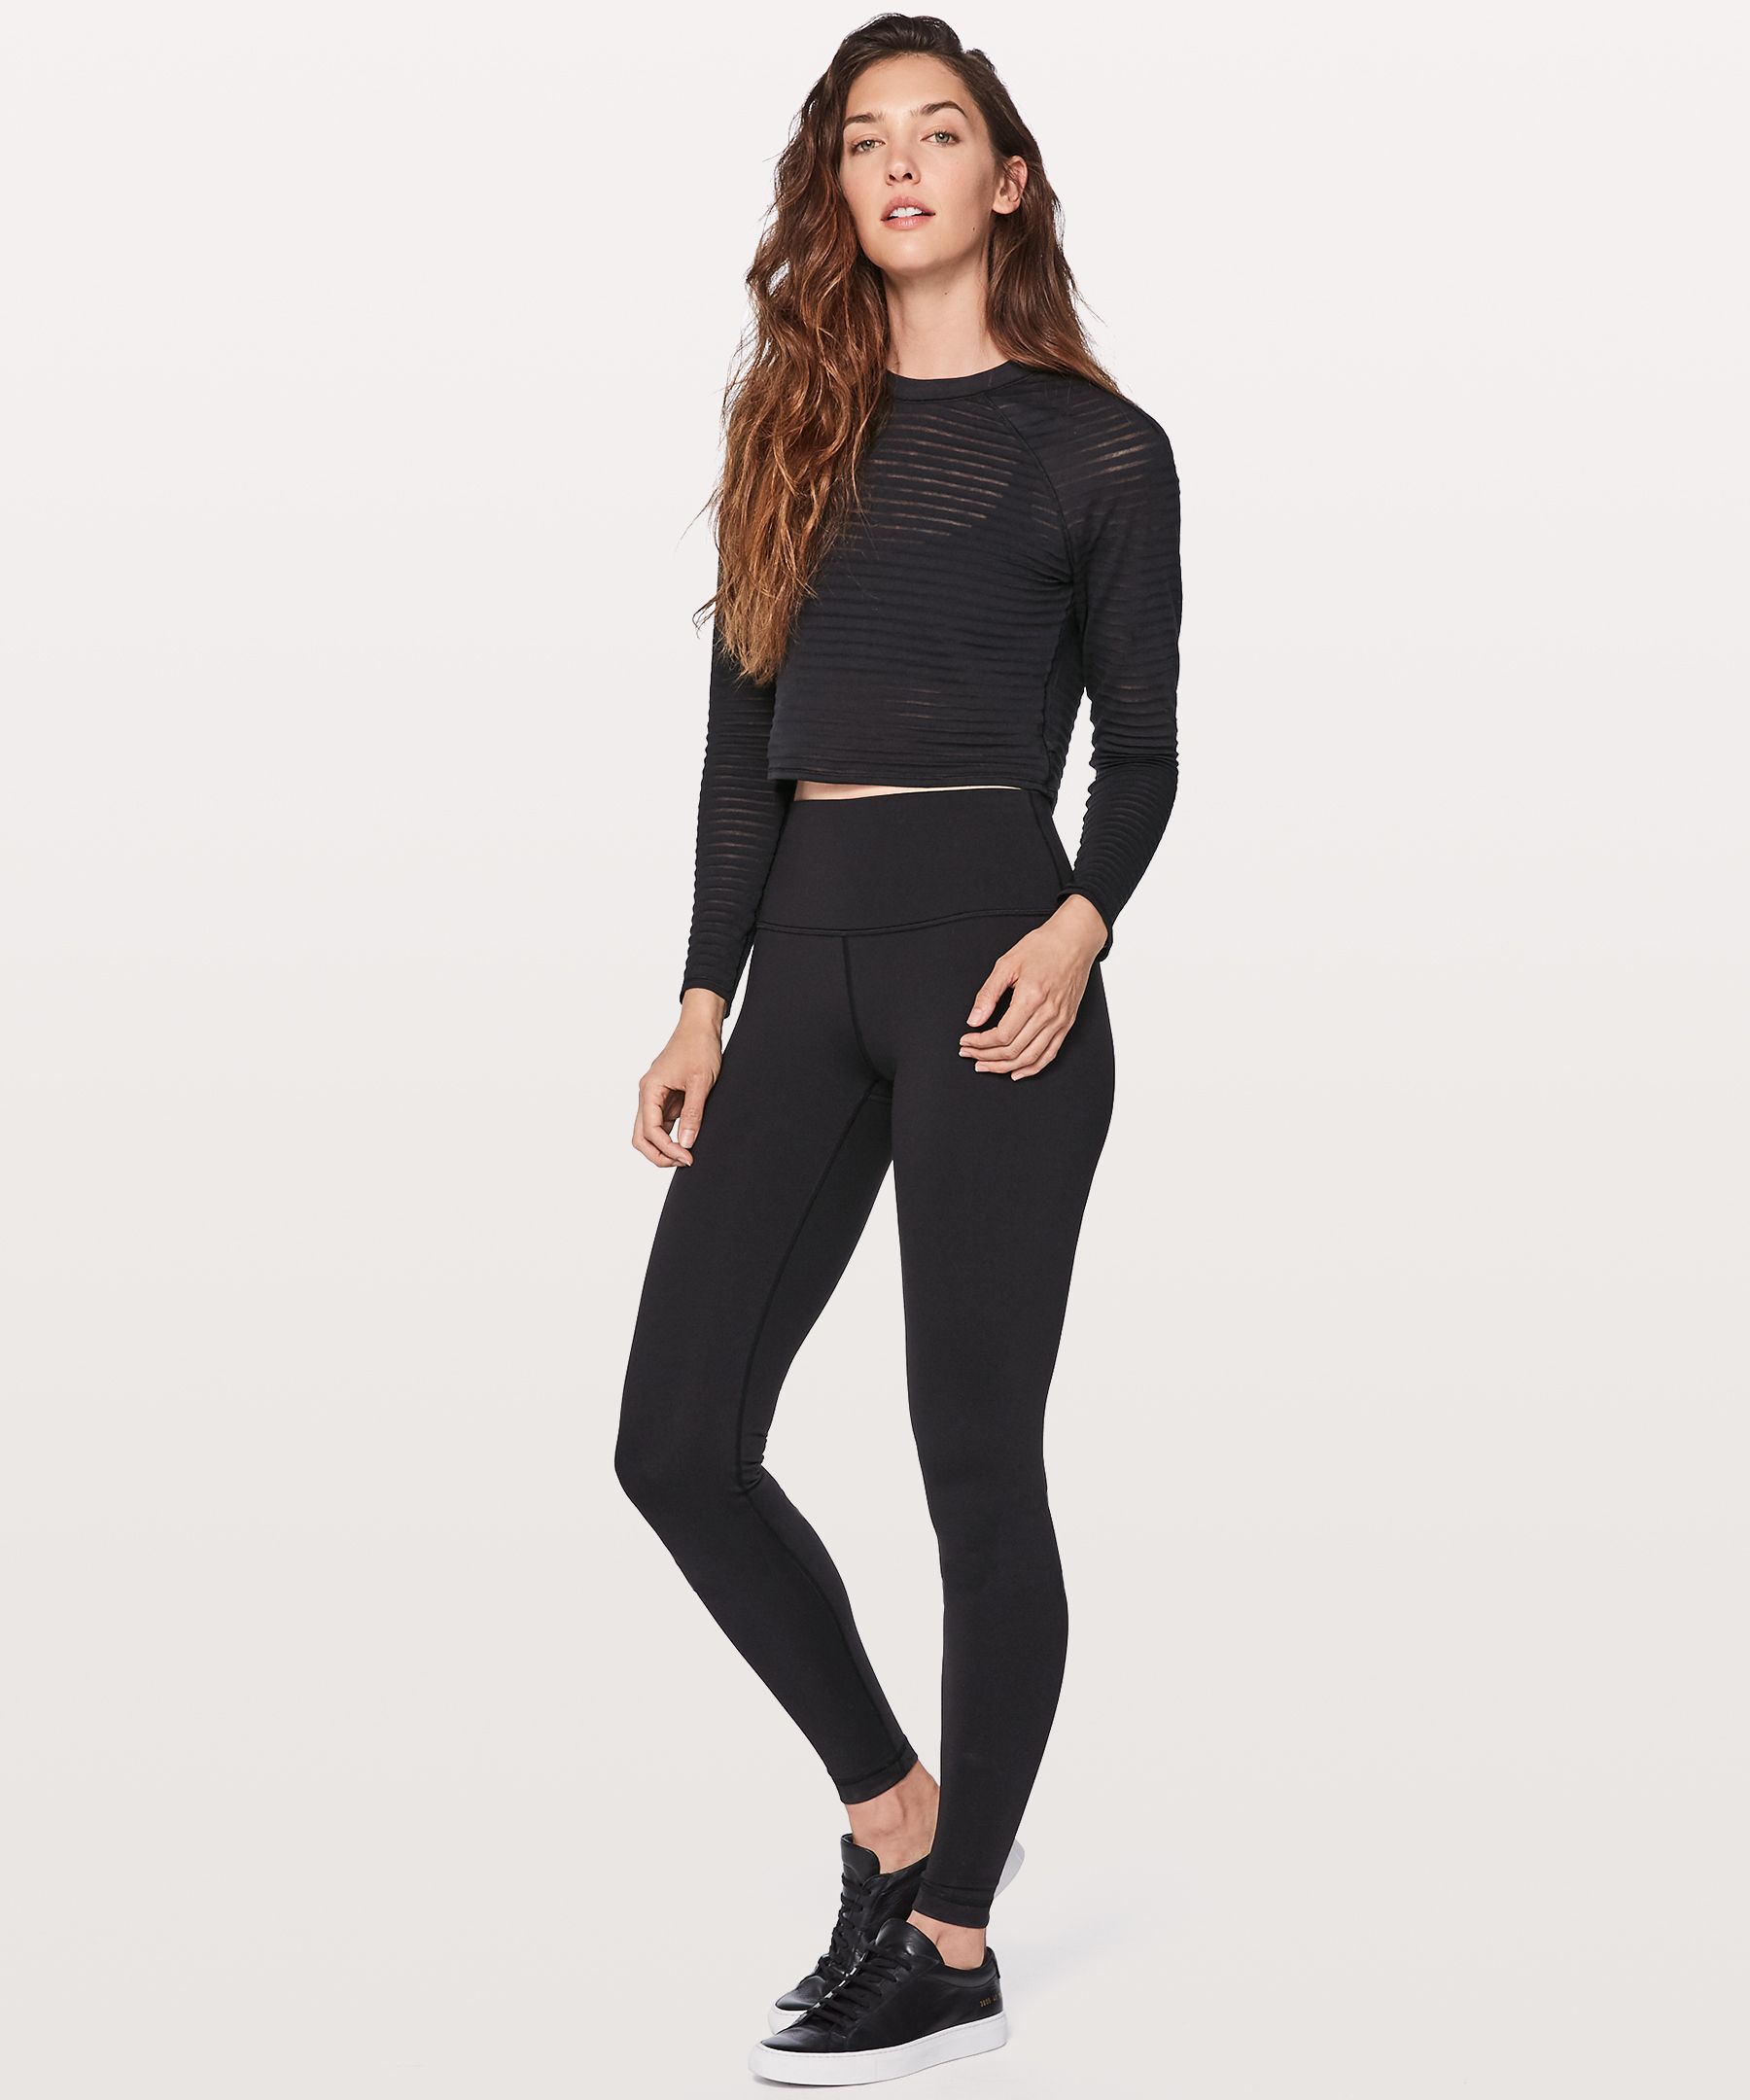 Classic meets perfection with these Speed Tight Wunder Unders